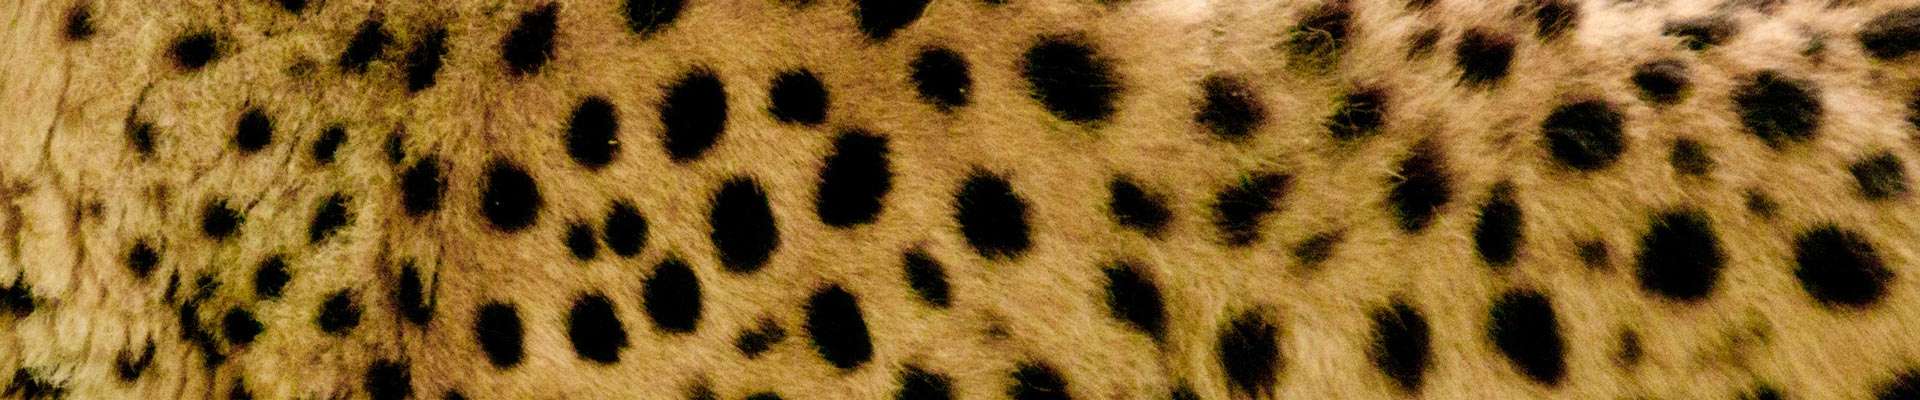 Cheetah Pattern for Maps and Directions